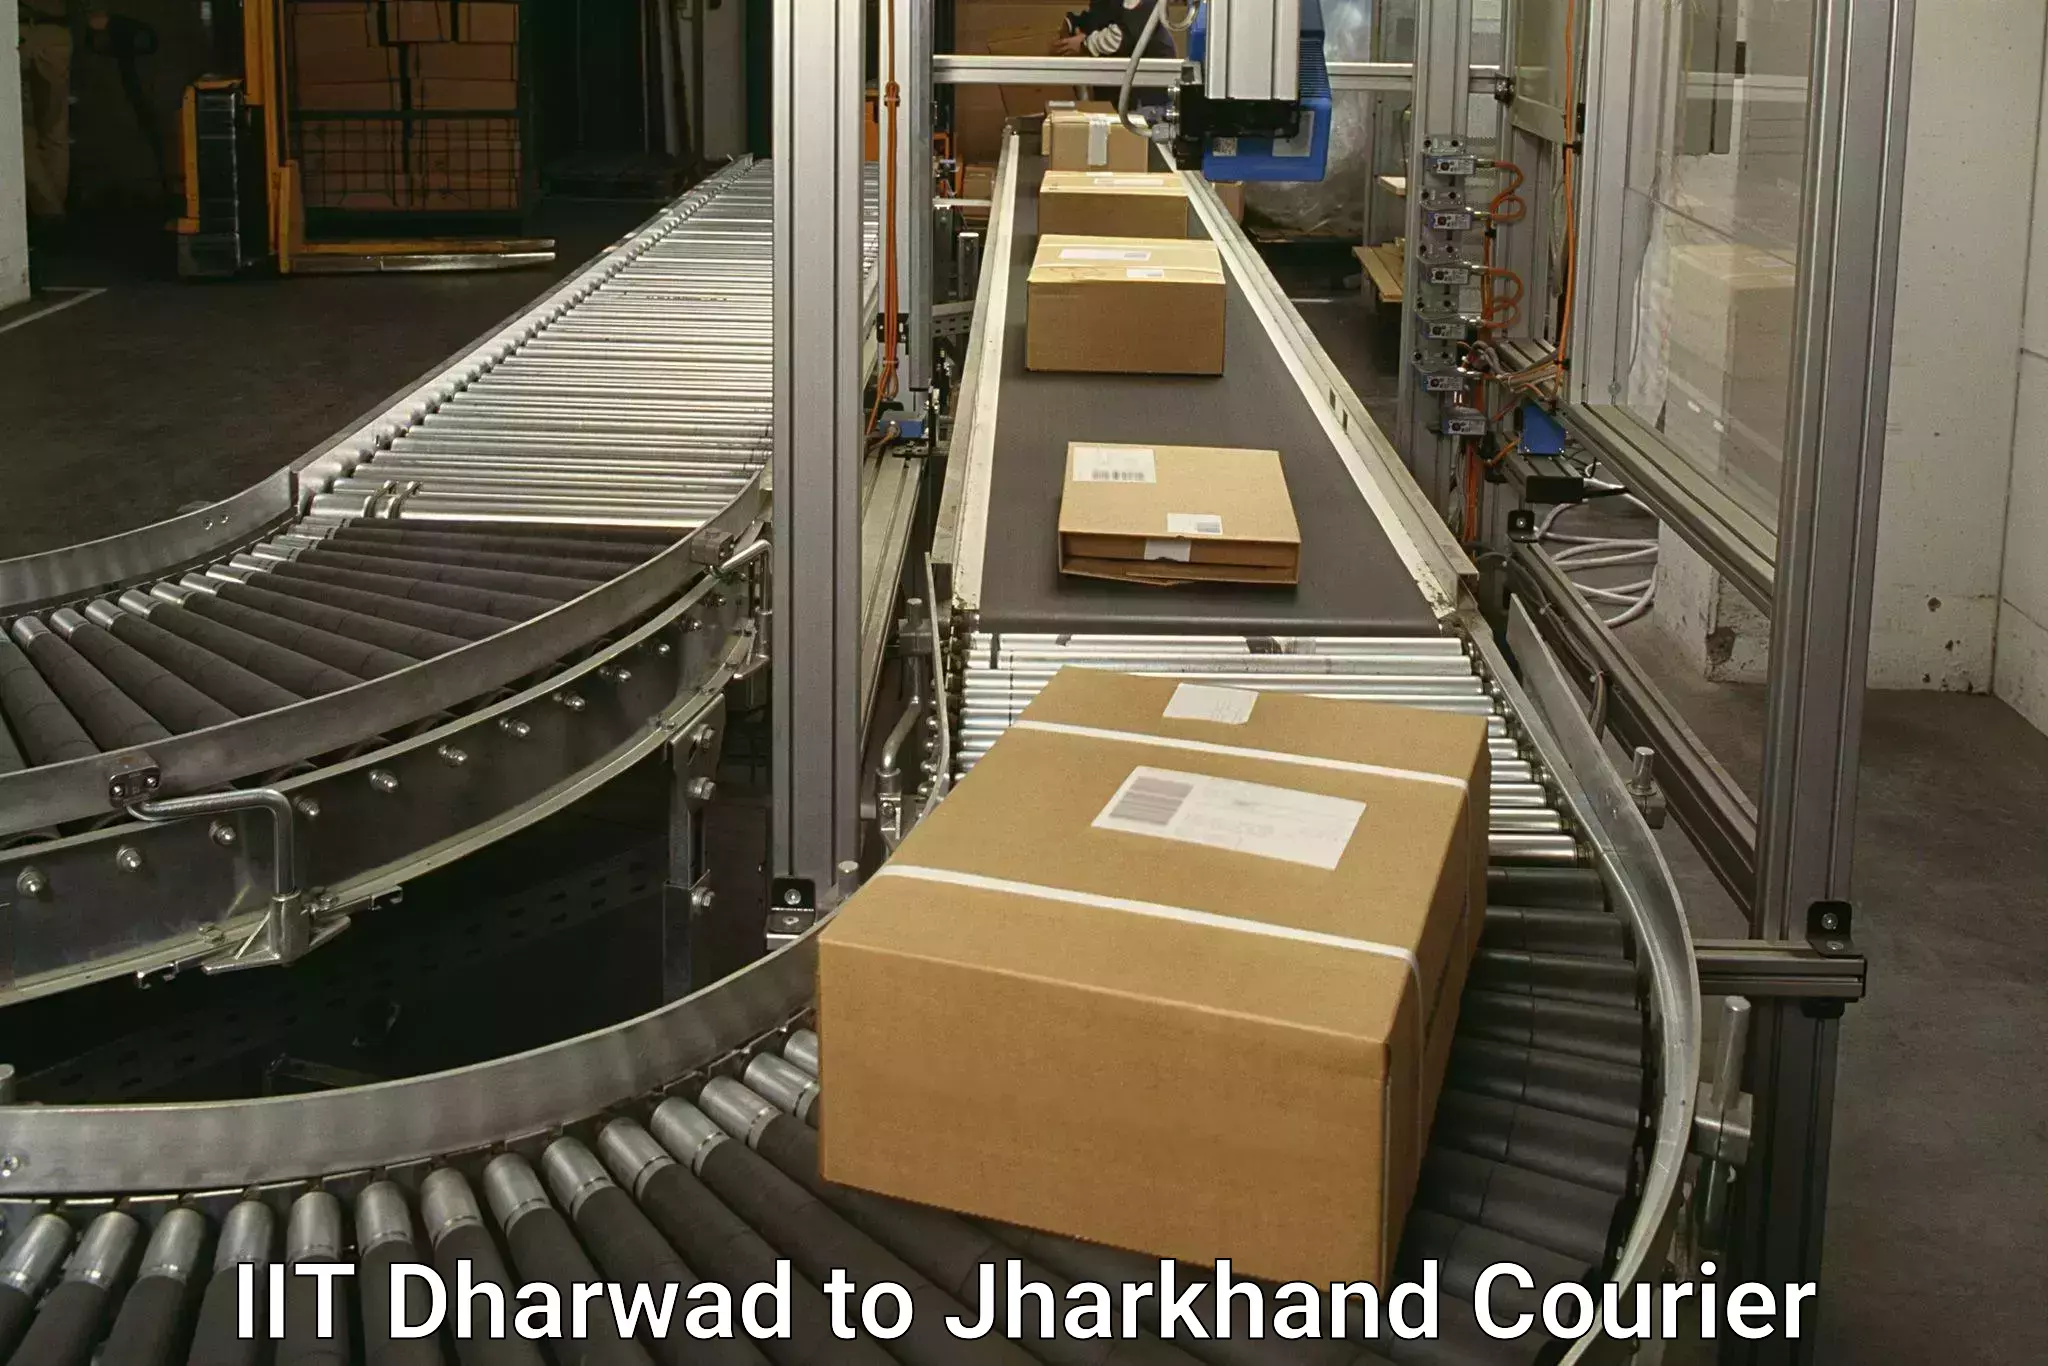 Business delivery service IIT Dharwad to Chaibasa